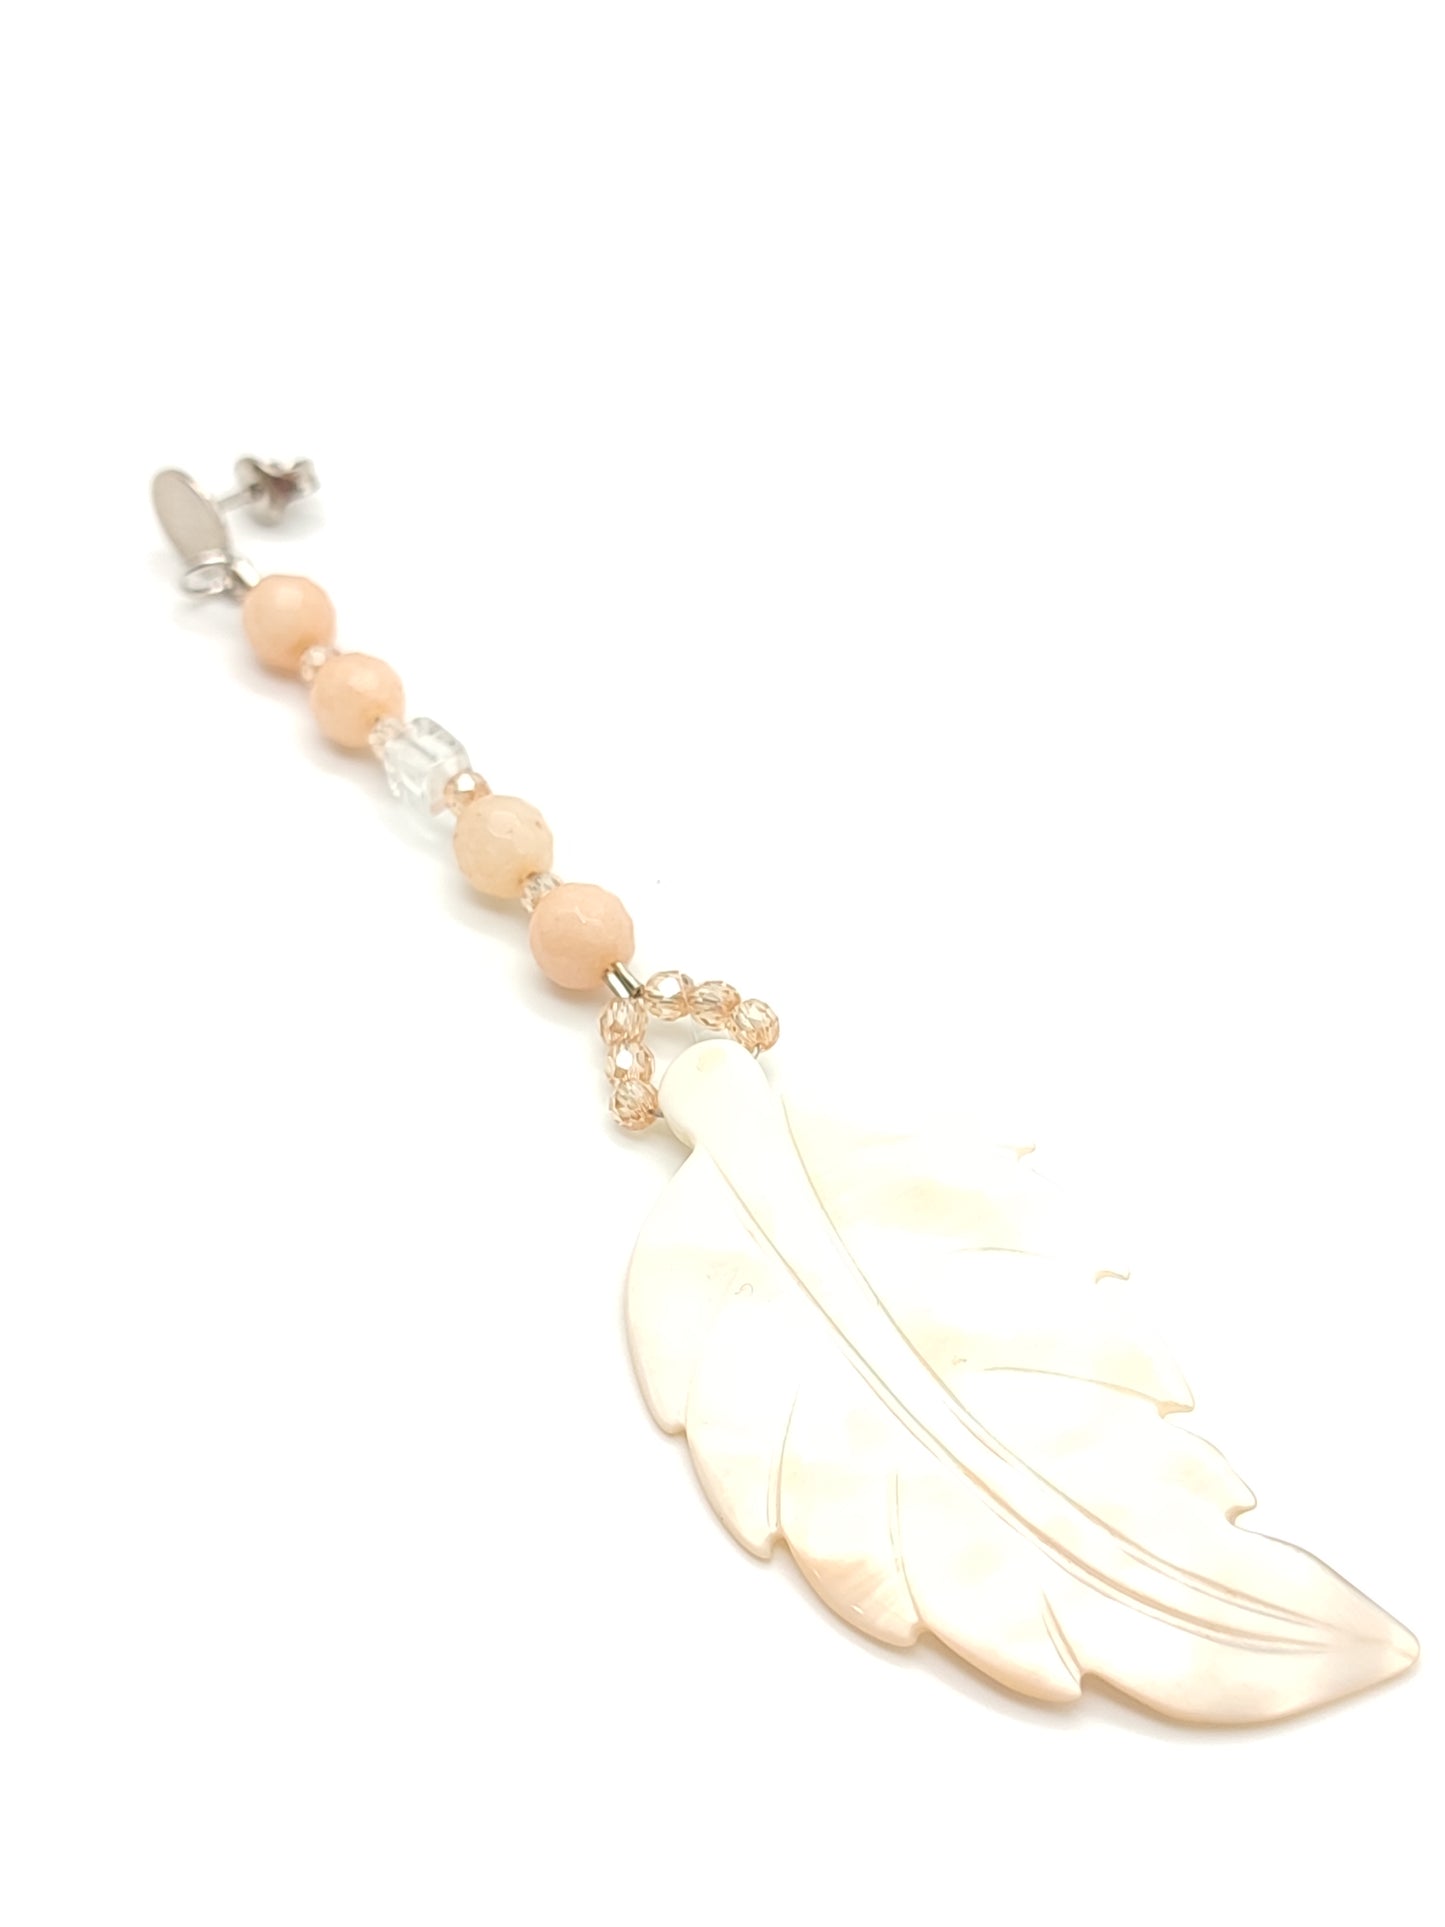 Single pendant silver earring with mother-of-pearl feather